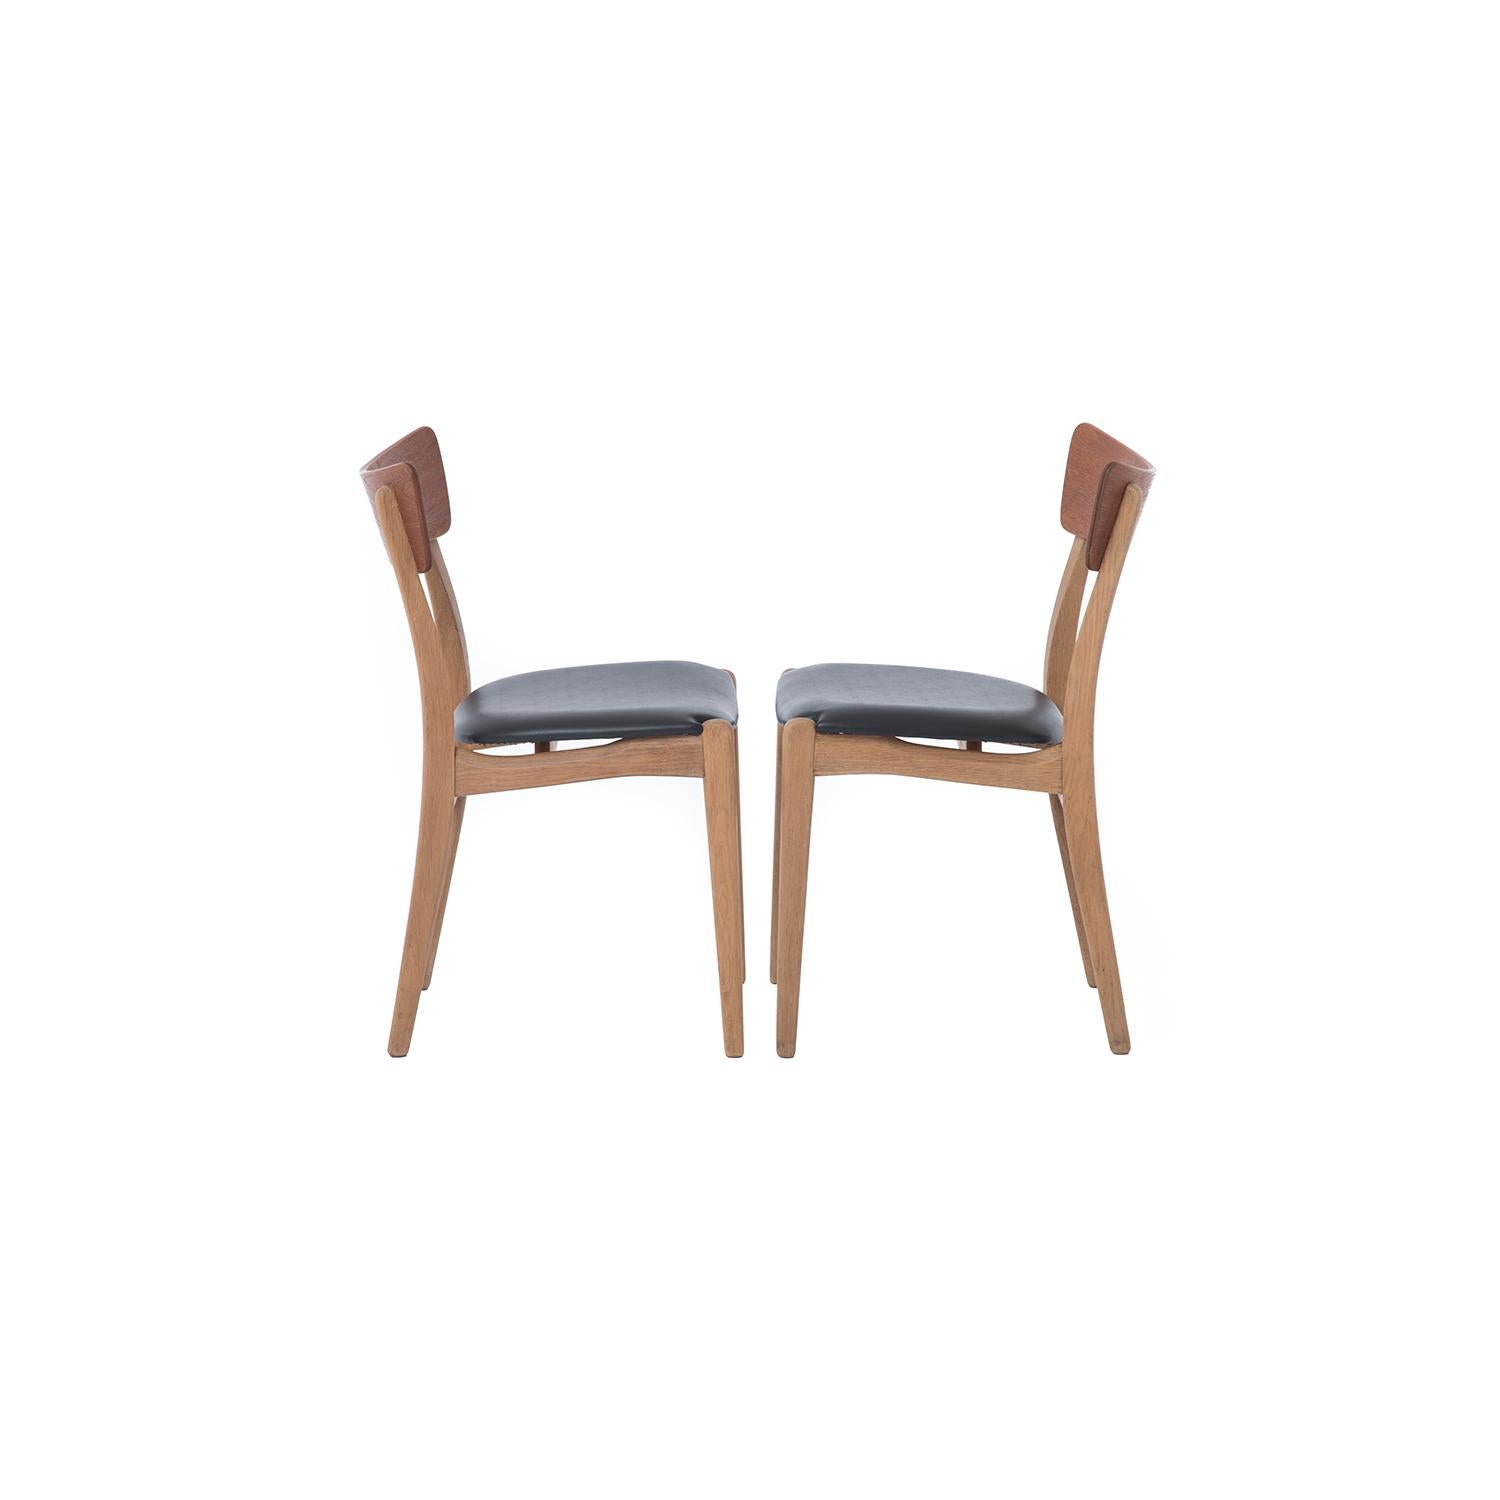 Teak and oak combine to create clean lines complimented with a swooping bowtie back. Six chairs included in the set.